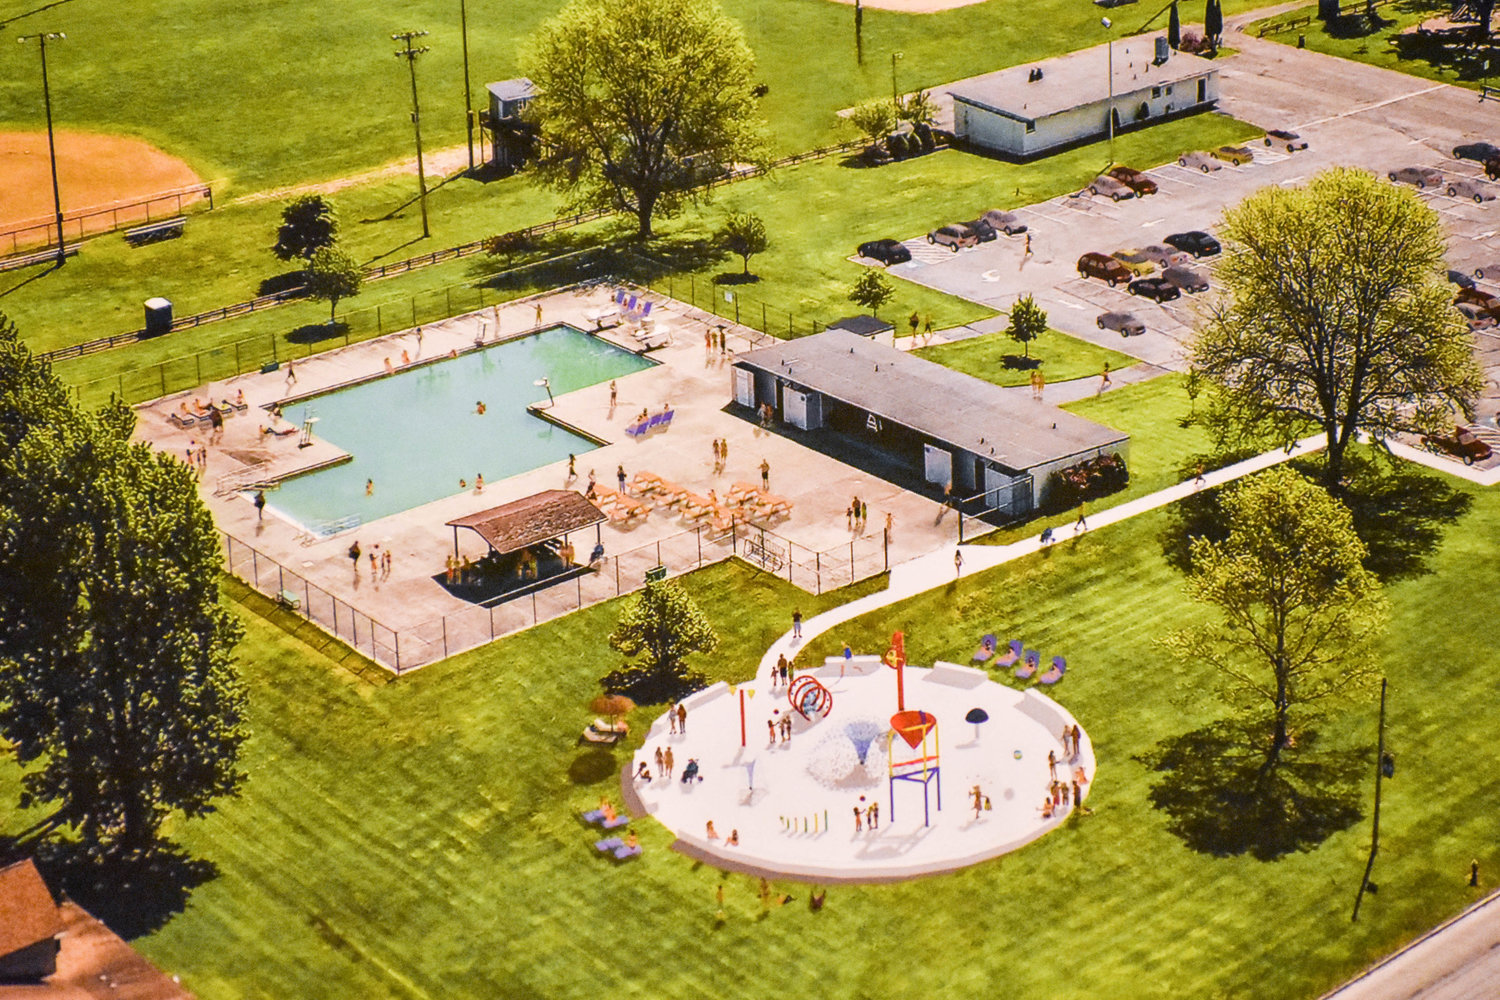 A rendering of proposed improvements to be made at Veteran's Memorial Park in Oneida.